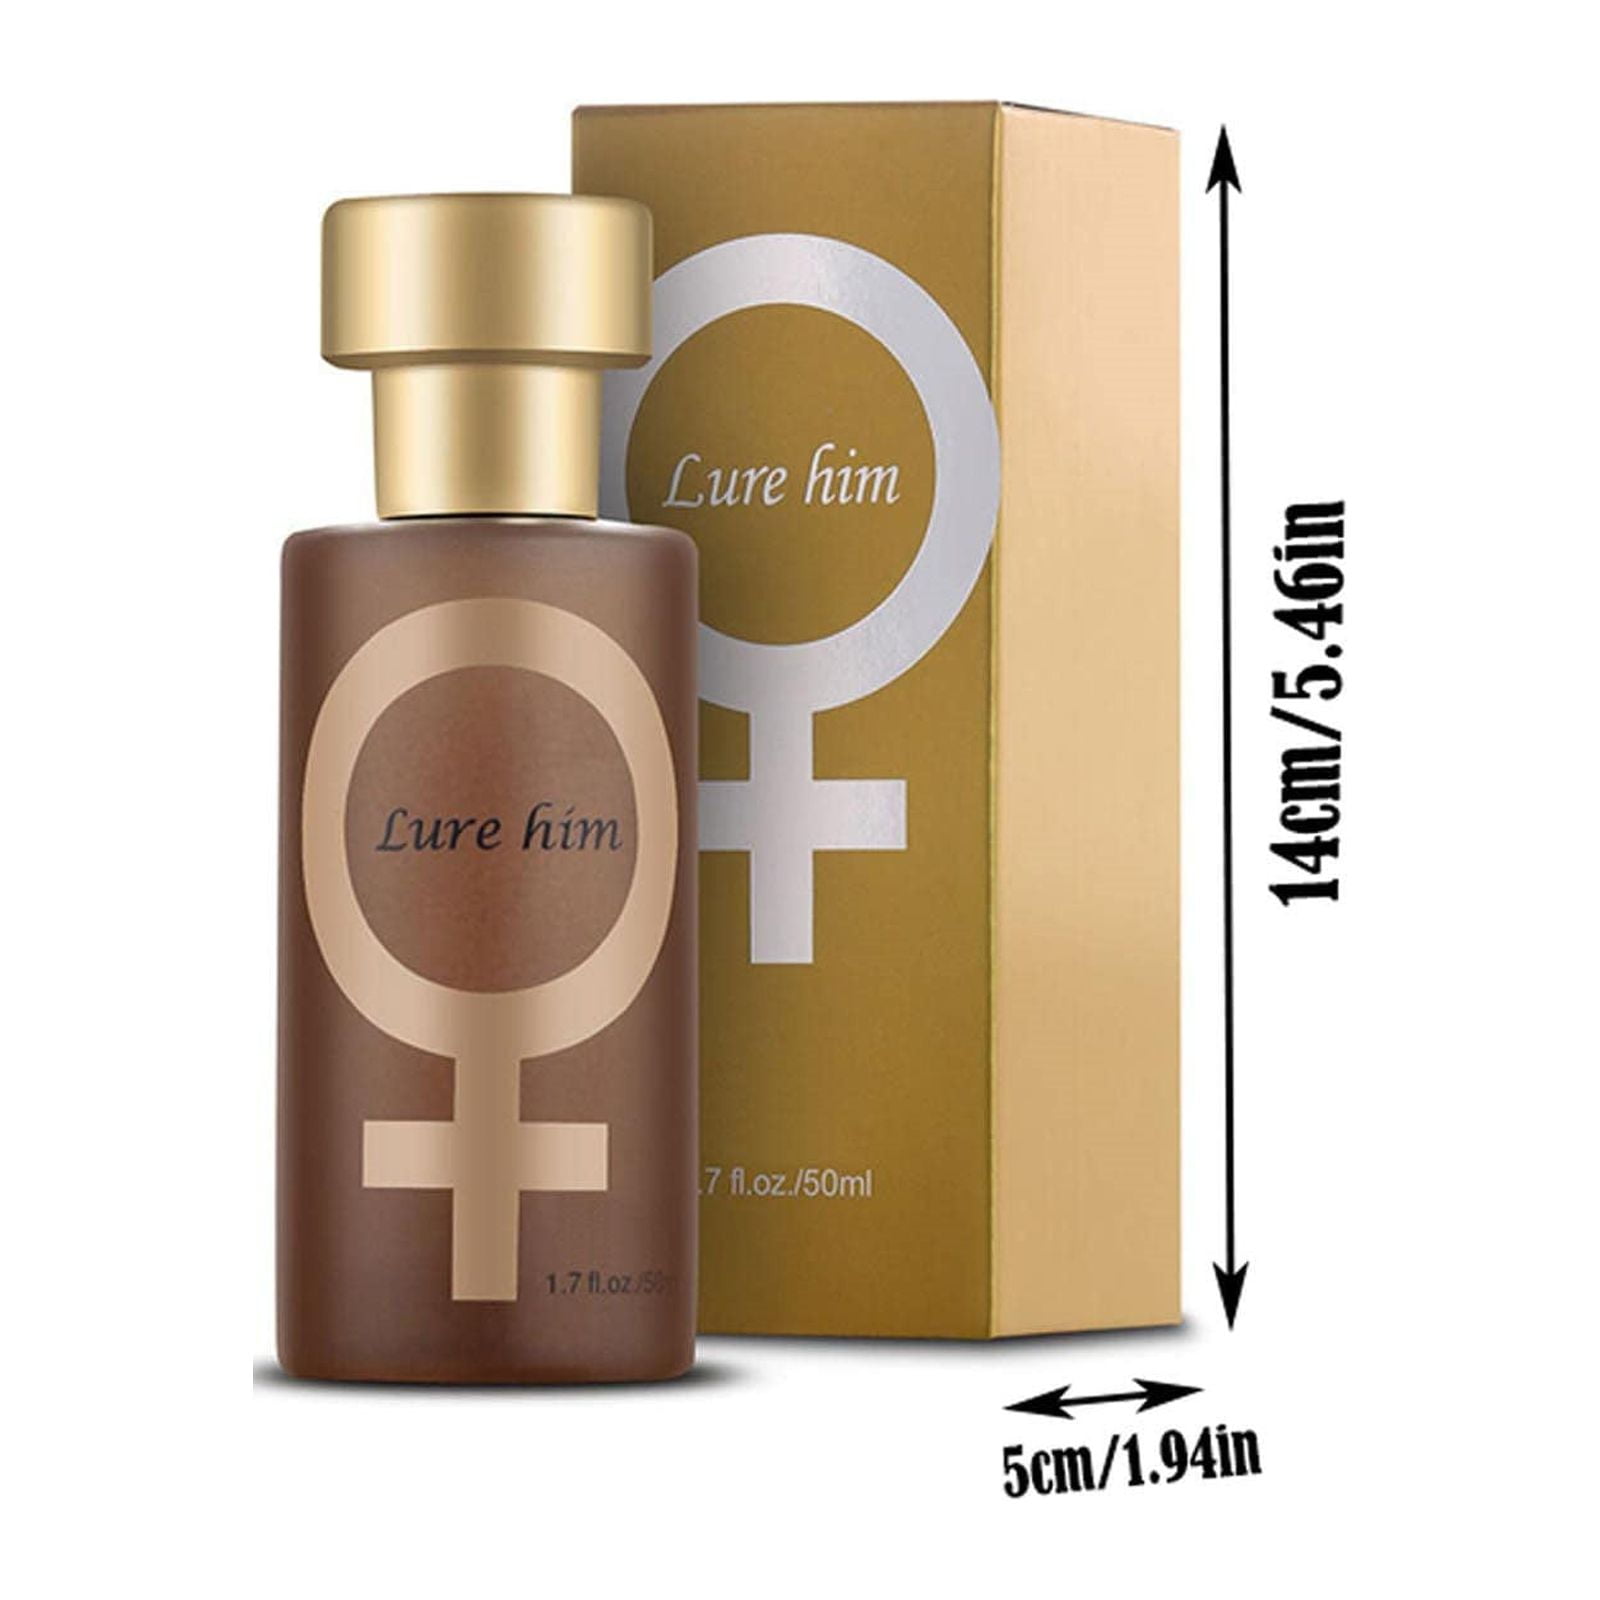 Golden Lure Perfume, 50ml Golden Lure Perfume to Attract Men and Women,  Cologne for Men to Attract Women, Lure Her, Lure Him 